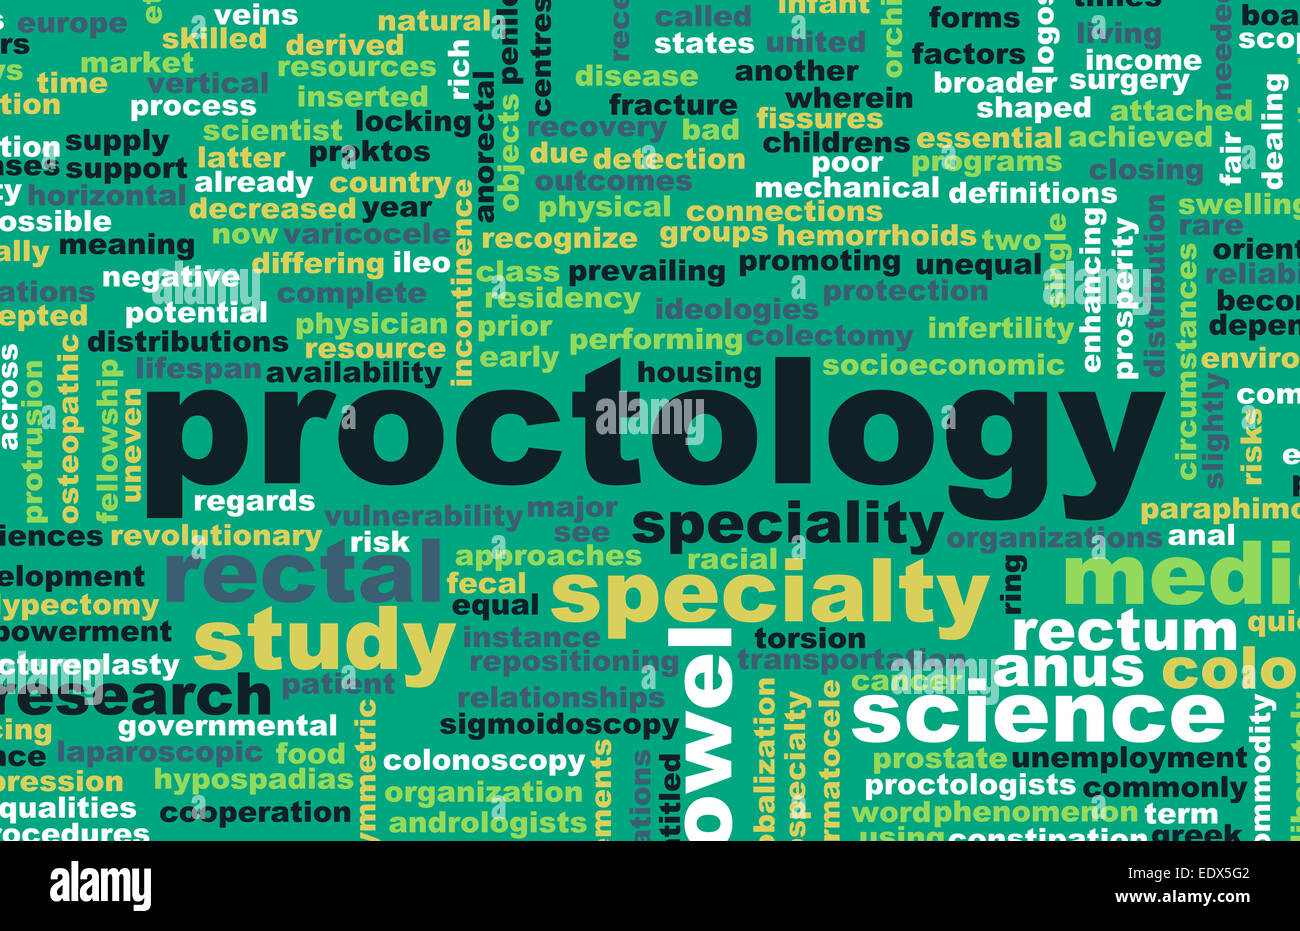 Proctology or Proctologist Medical Field Specialty As Art Stock Photo